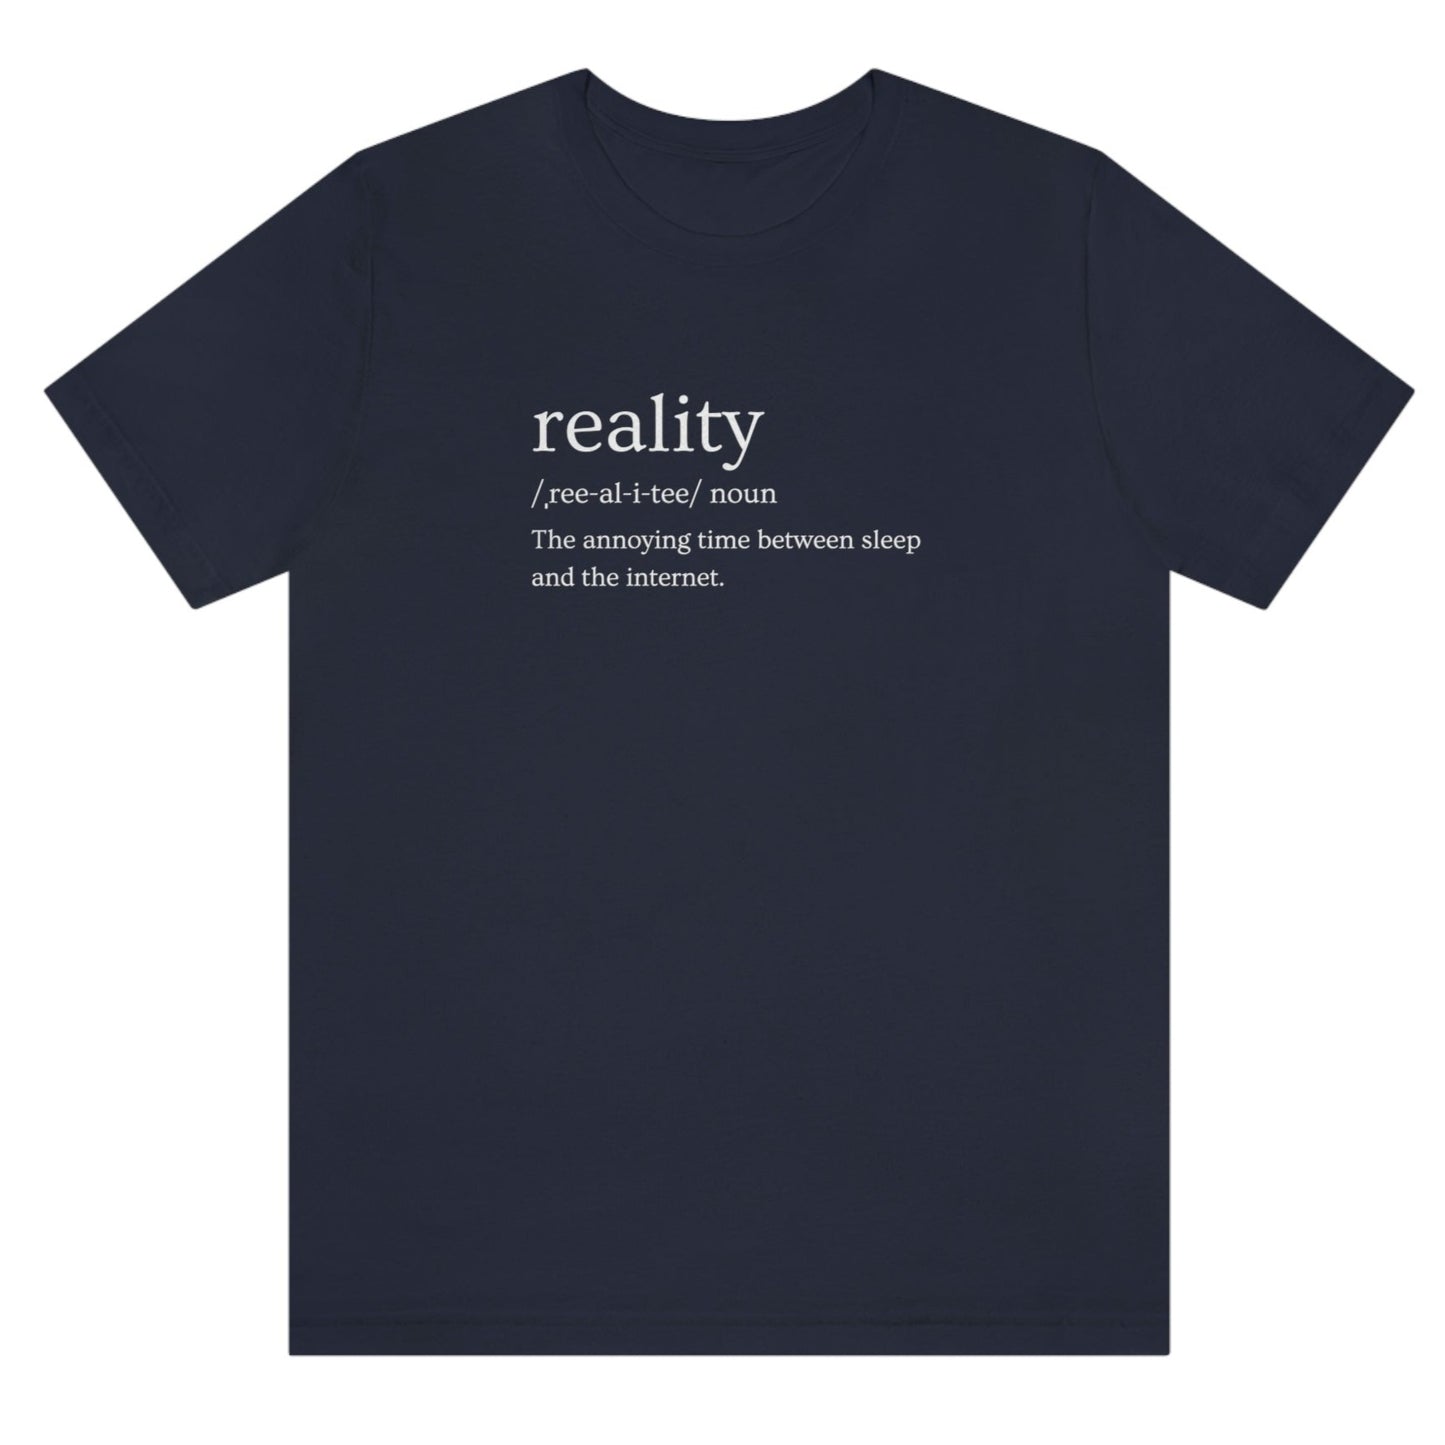 reality-the-annoying-time-between-sleep-and-the-internet-navy-t-shirt